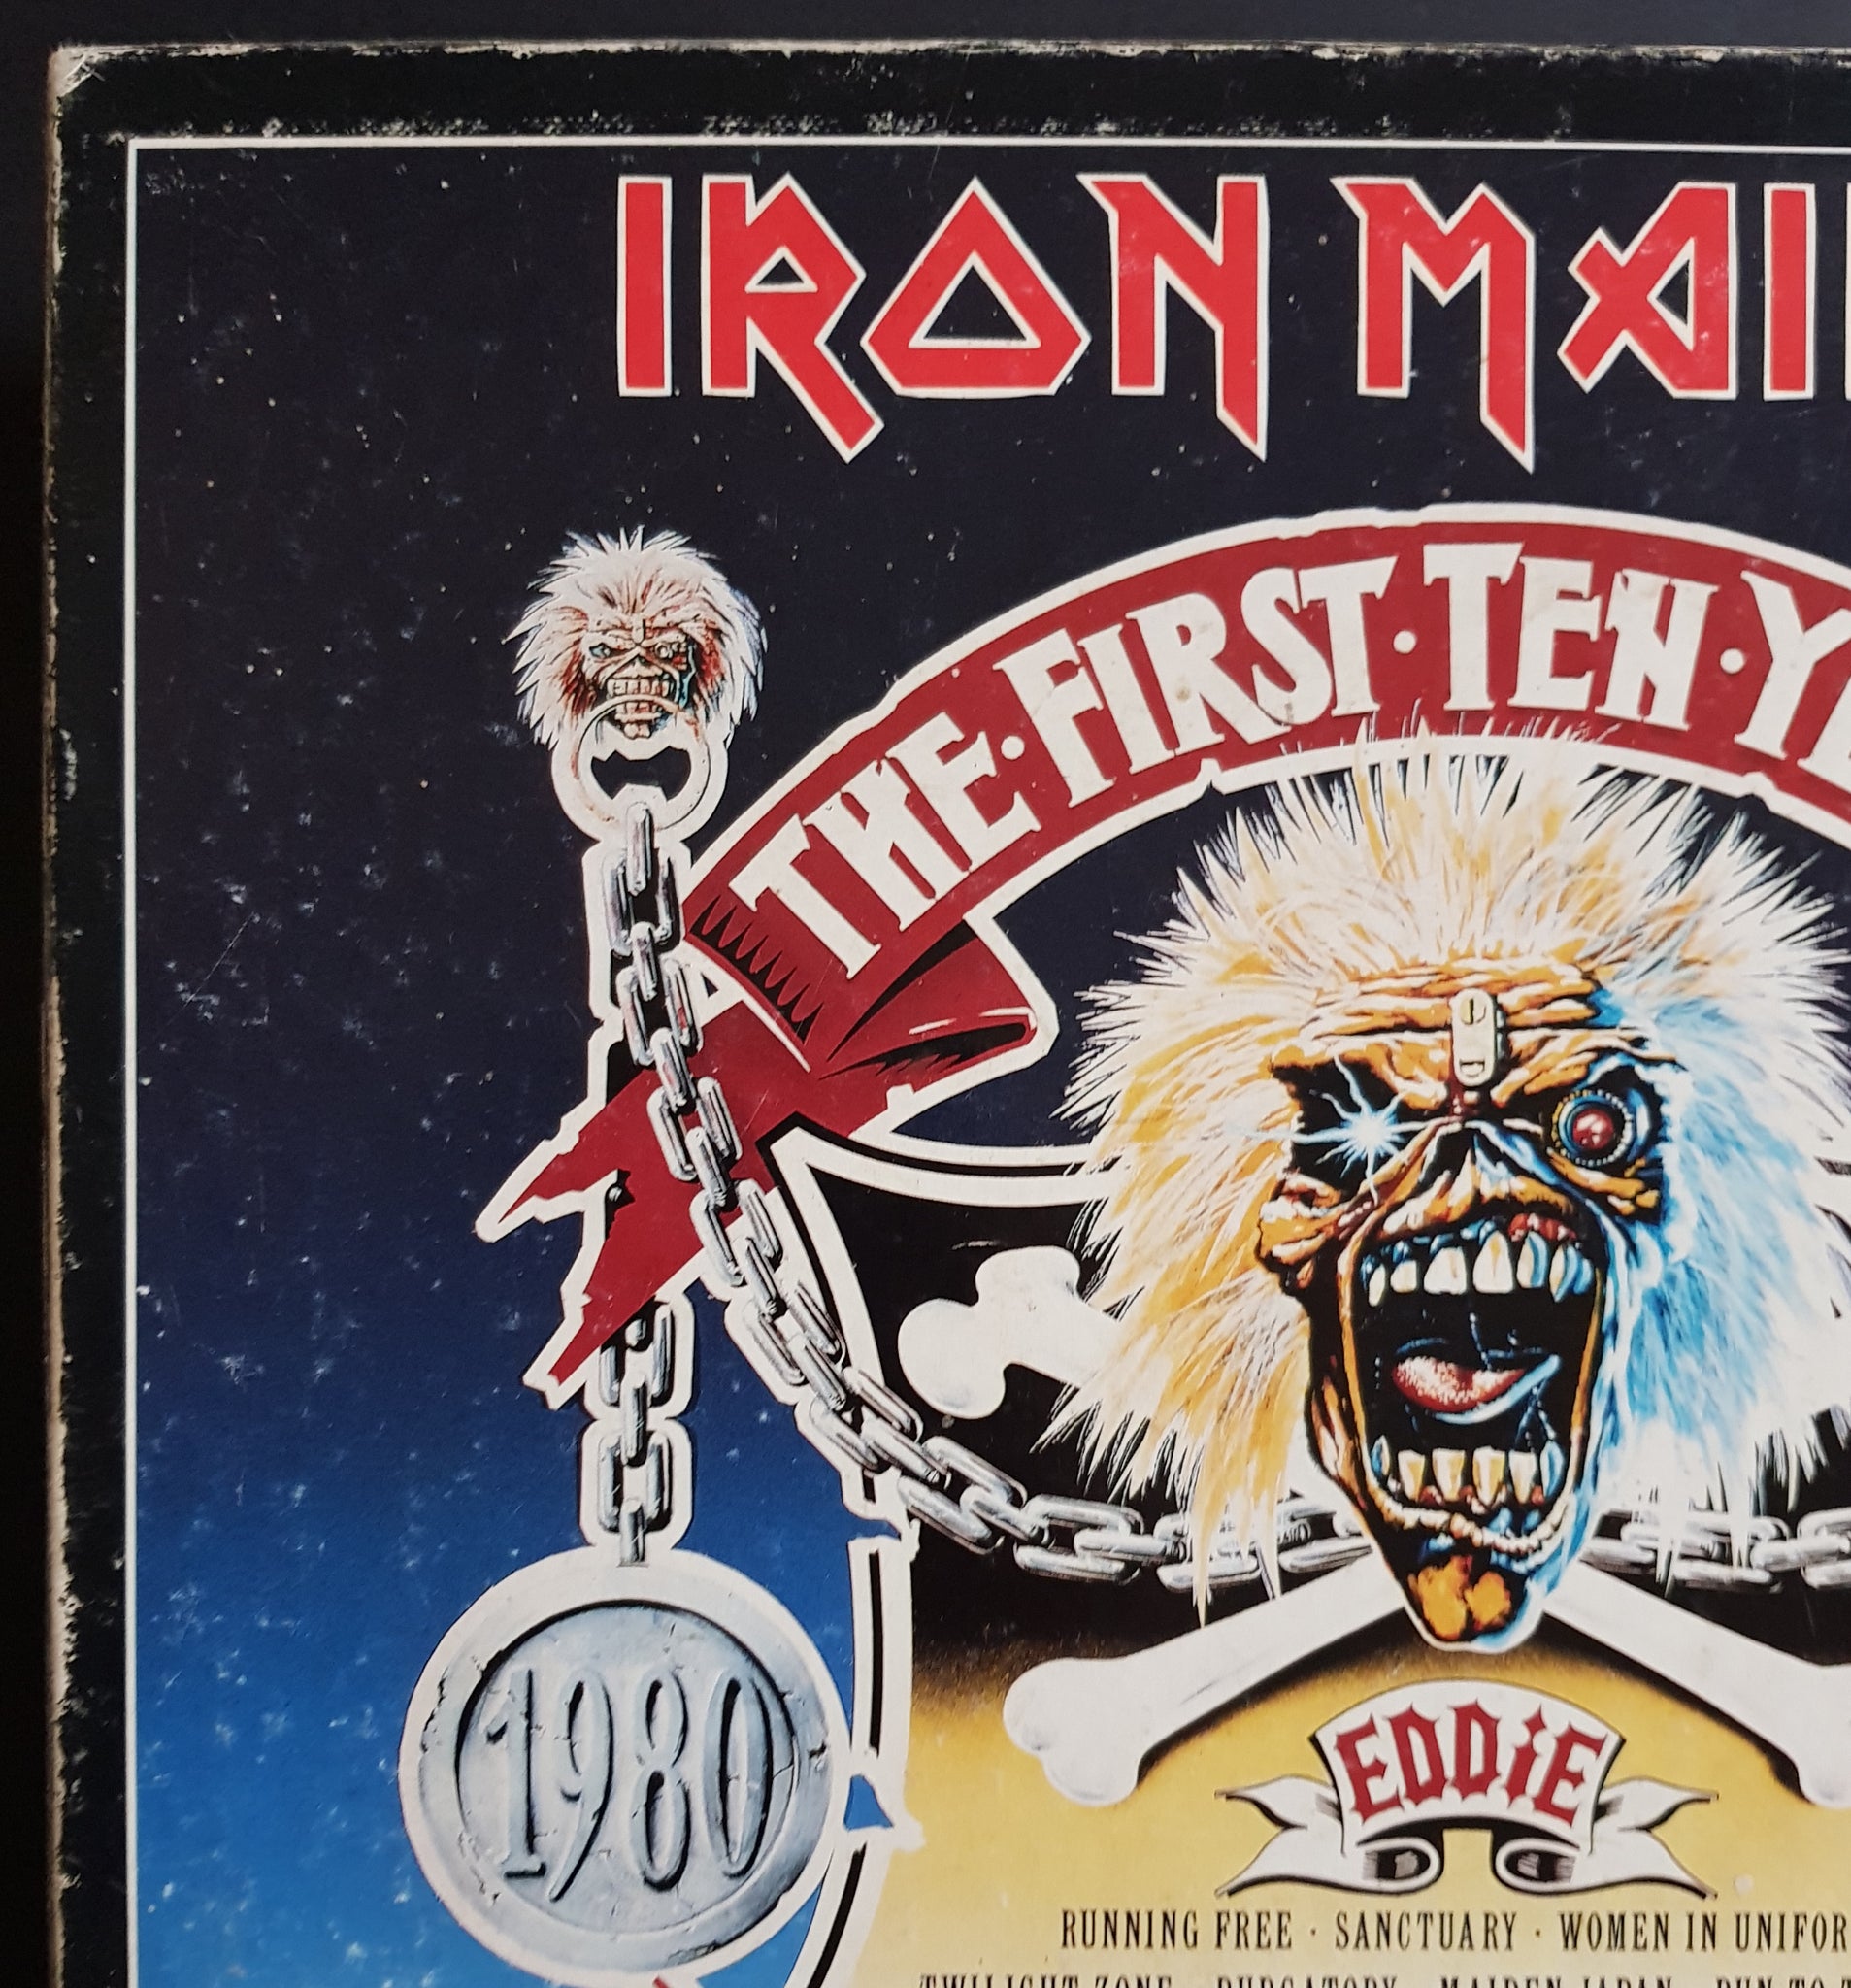 Iron Maiden - The First Ten Years – Vicious Sloth Collectables